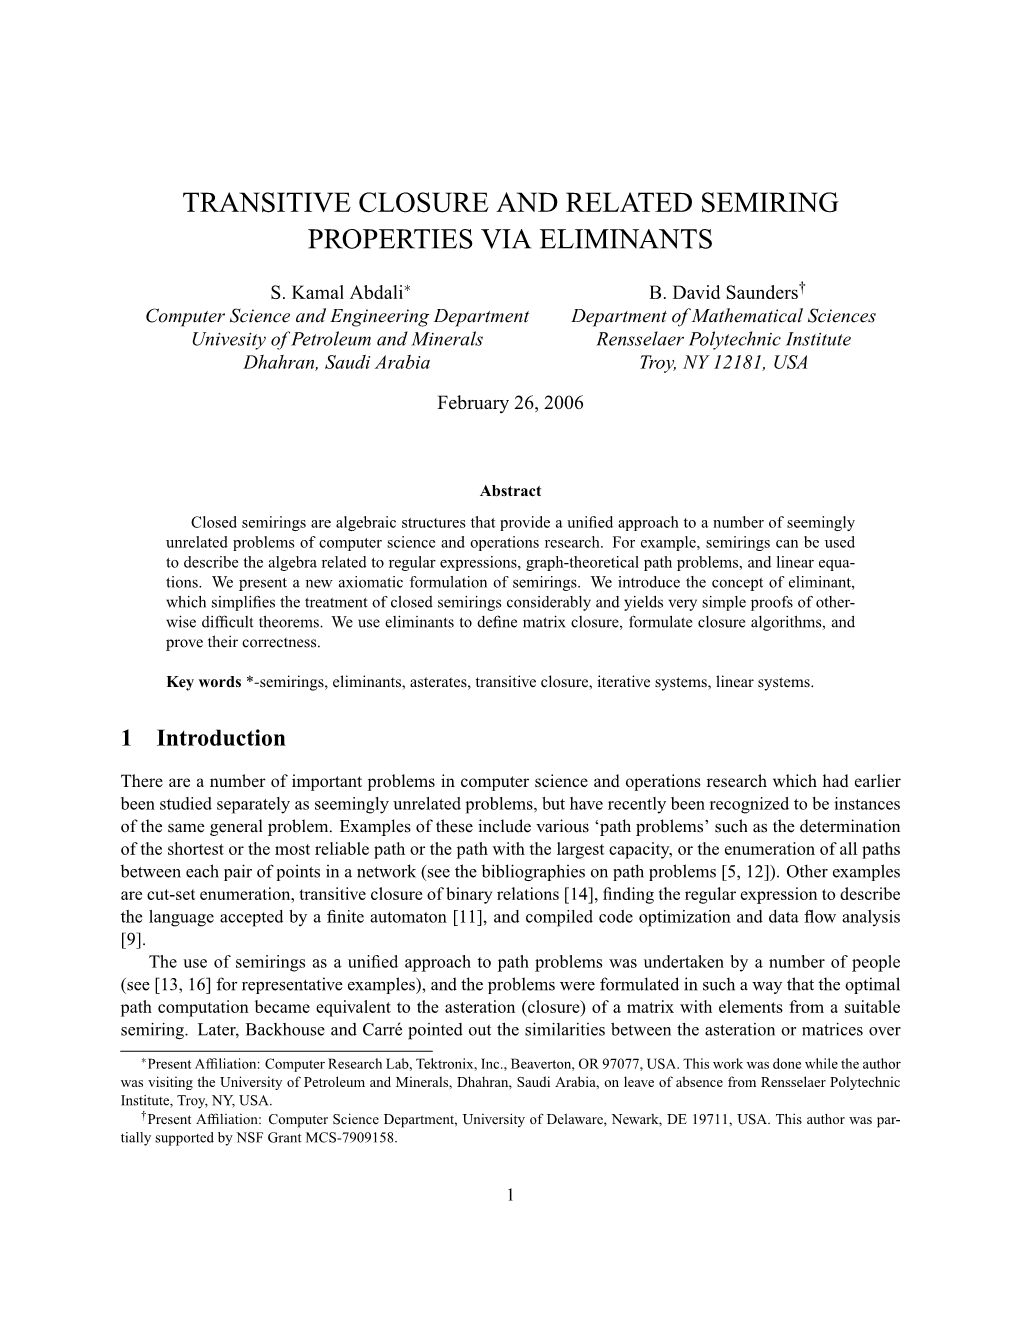 Transitive Closure and Related Semiring Properties Via Eliminants